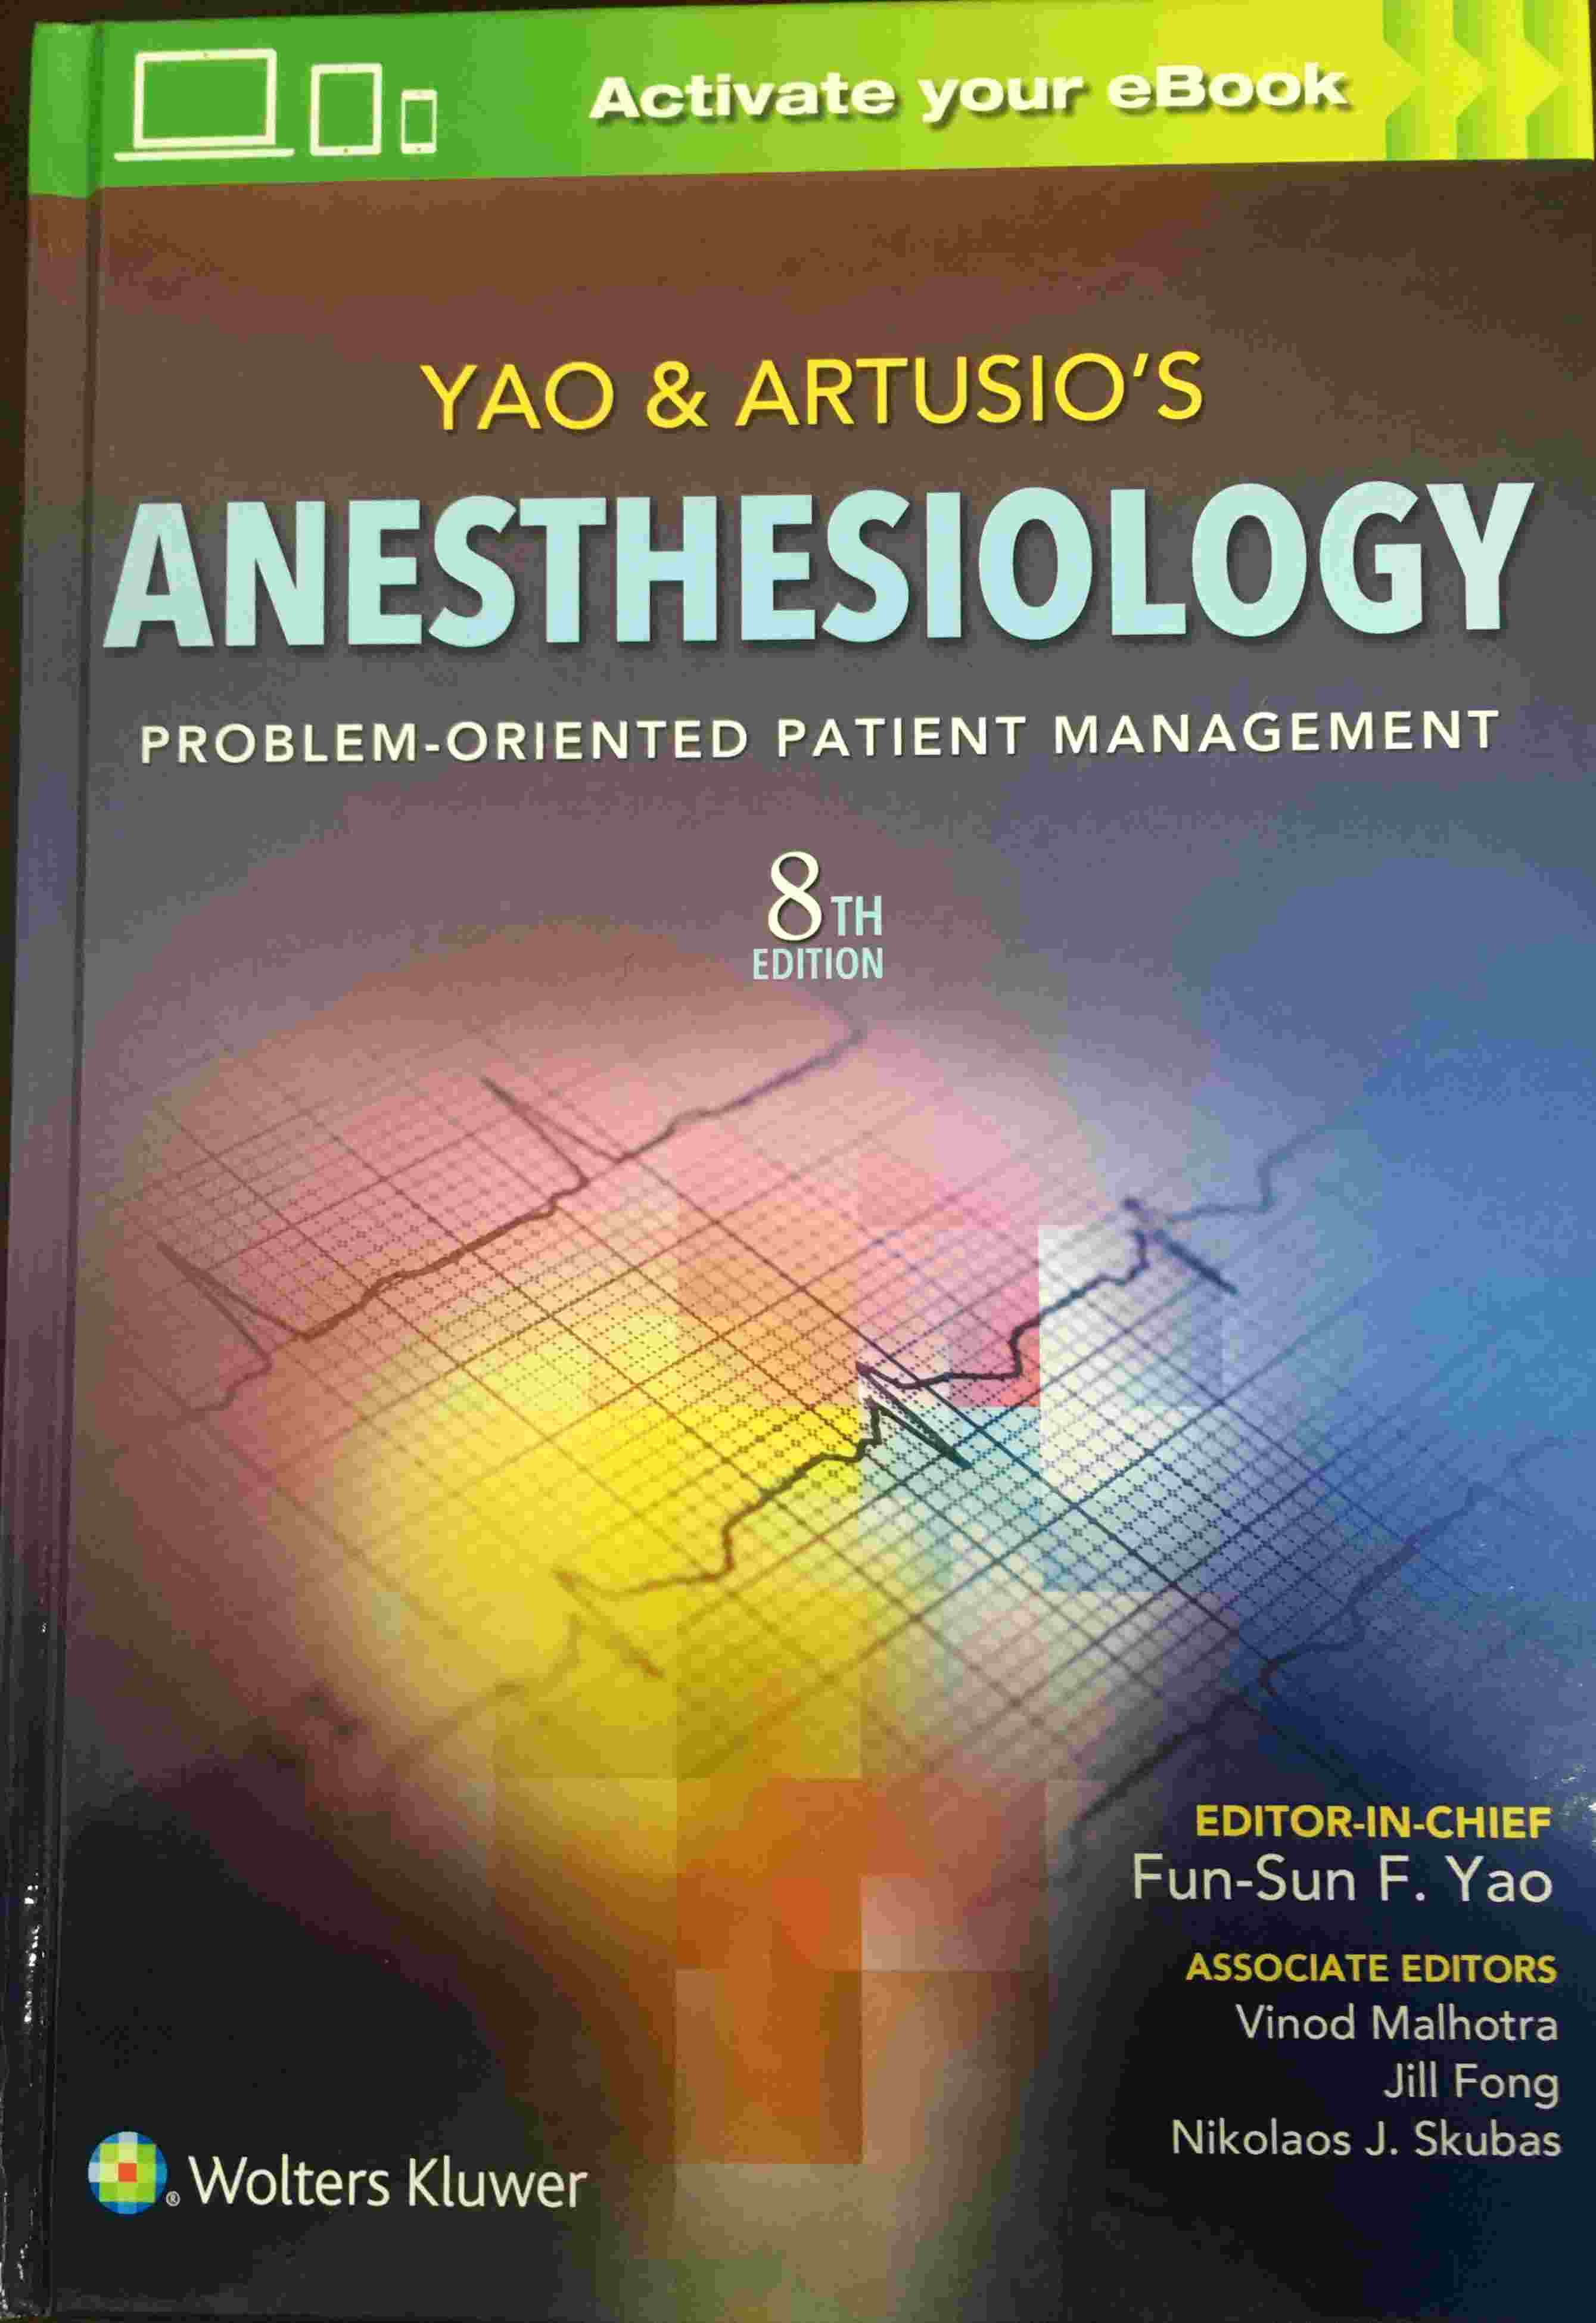 « Yao & Artusio's Anesthesiology: Problem-Oriented Patient Management »